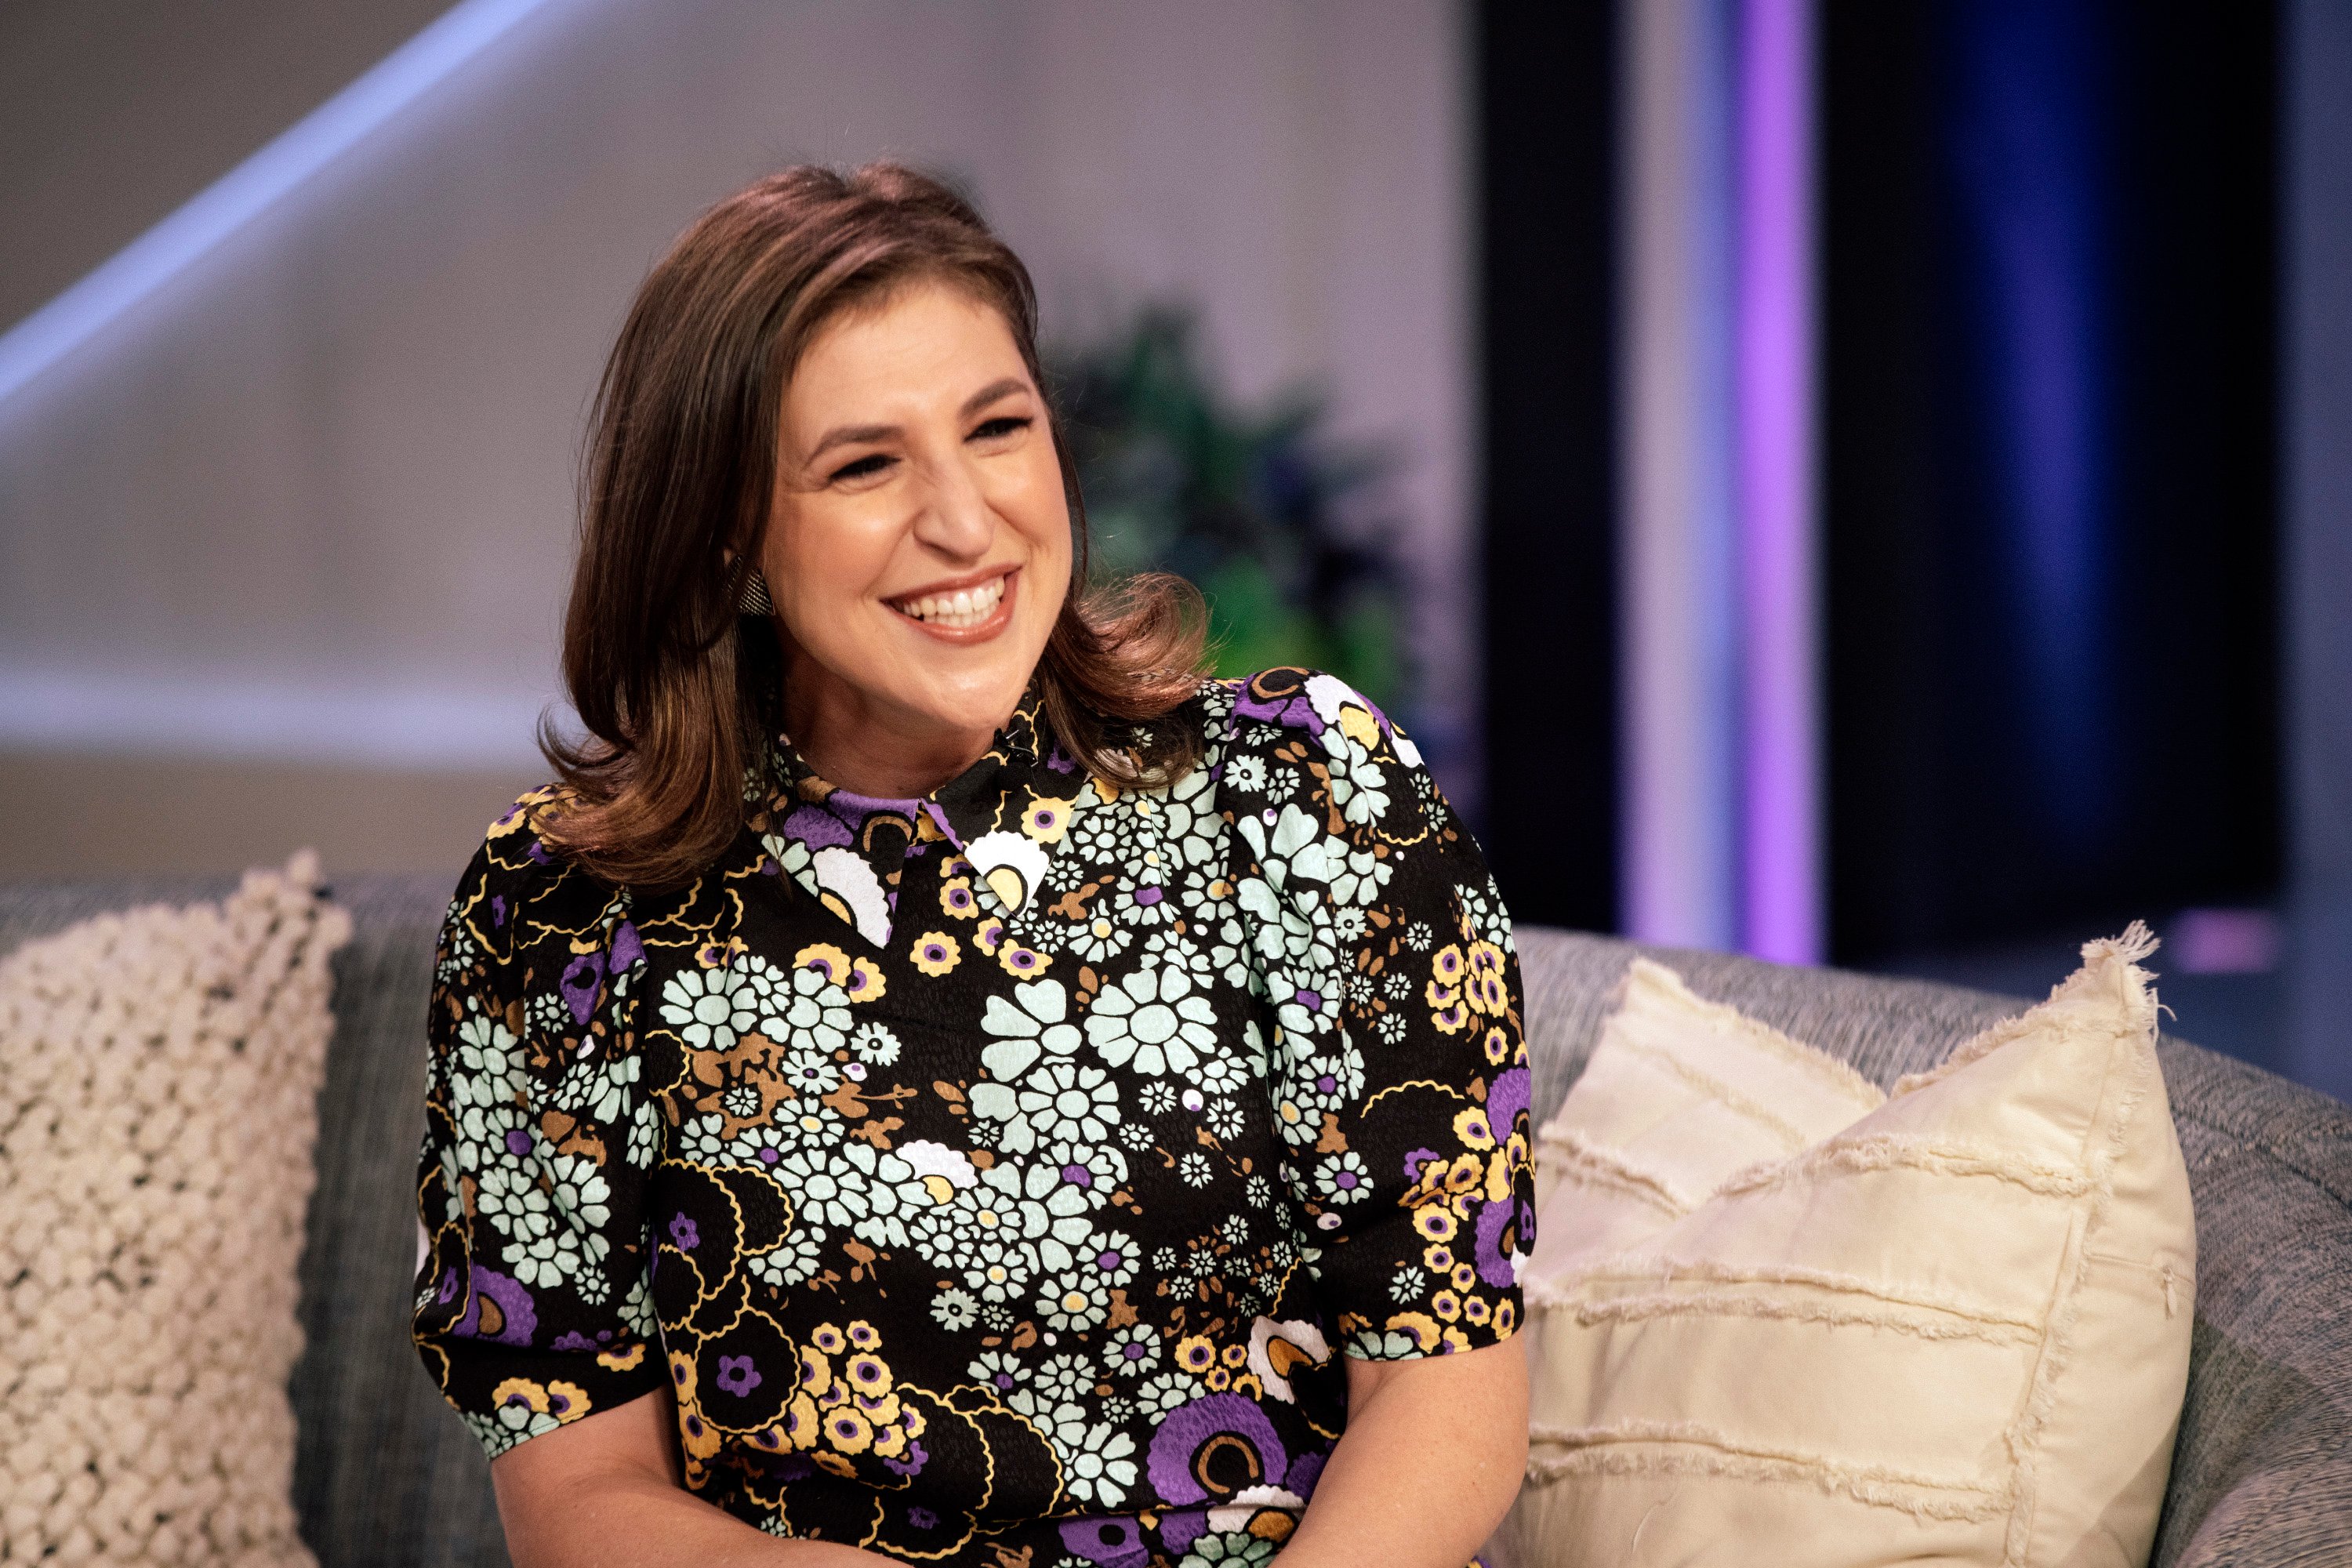 Actor and Jeopardy! host Mayim Bialik wears a short-sleeve floral dress in an appearance on The Kelly Clarkson Show